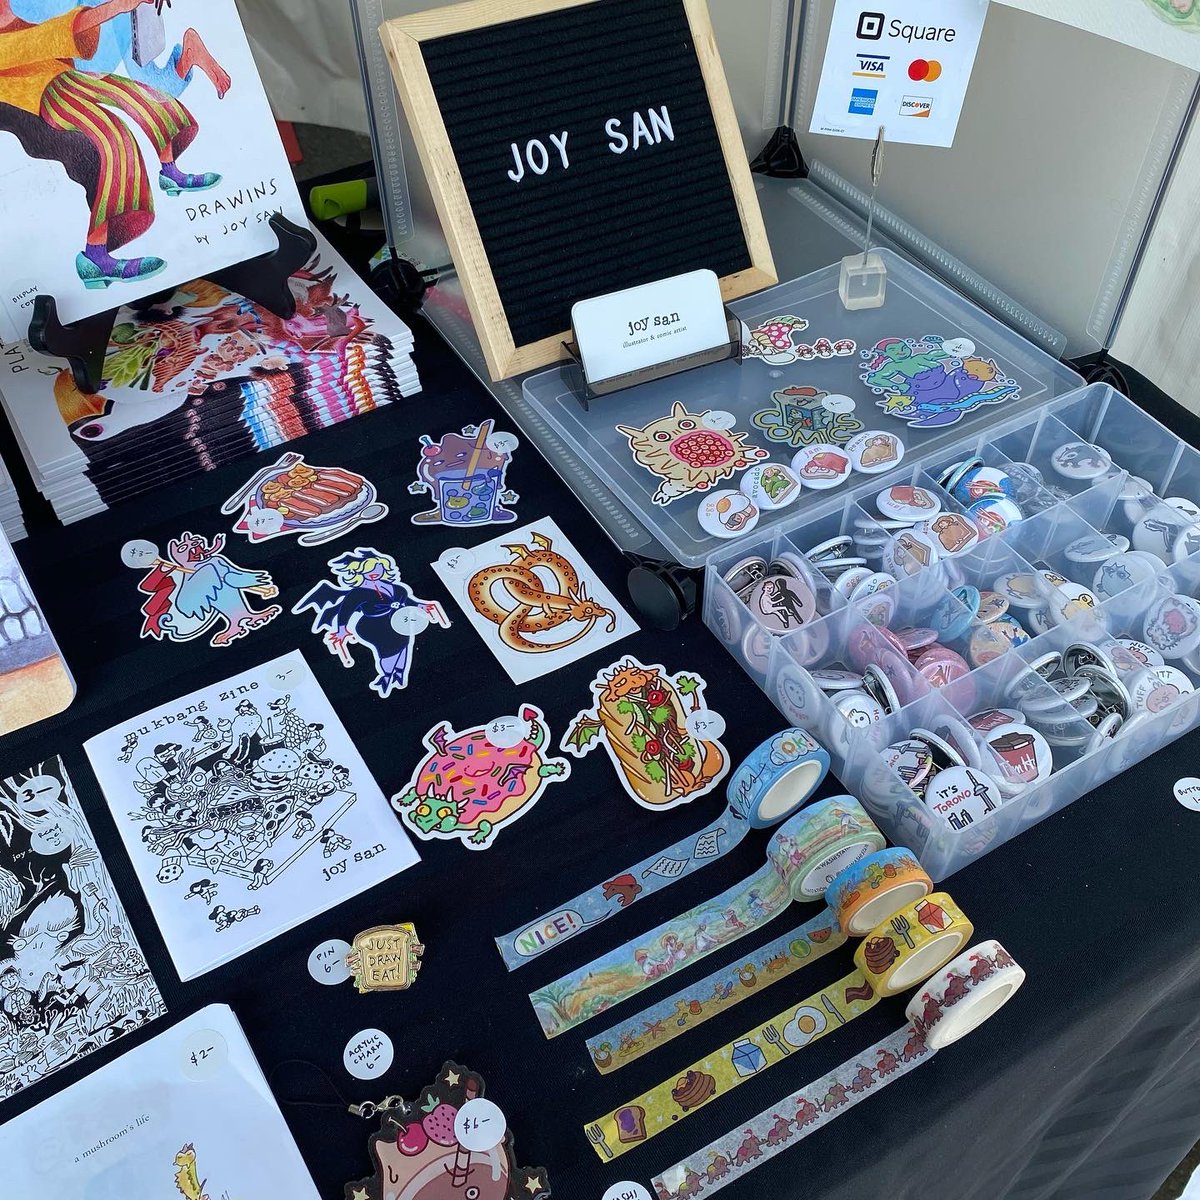 「All set up for day two here at MCAF, ten」|JOY SANのイラスト